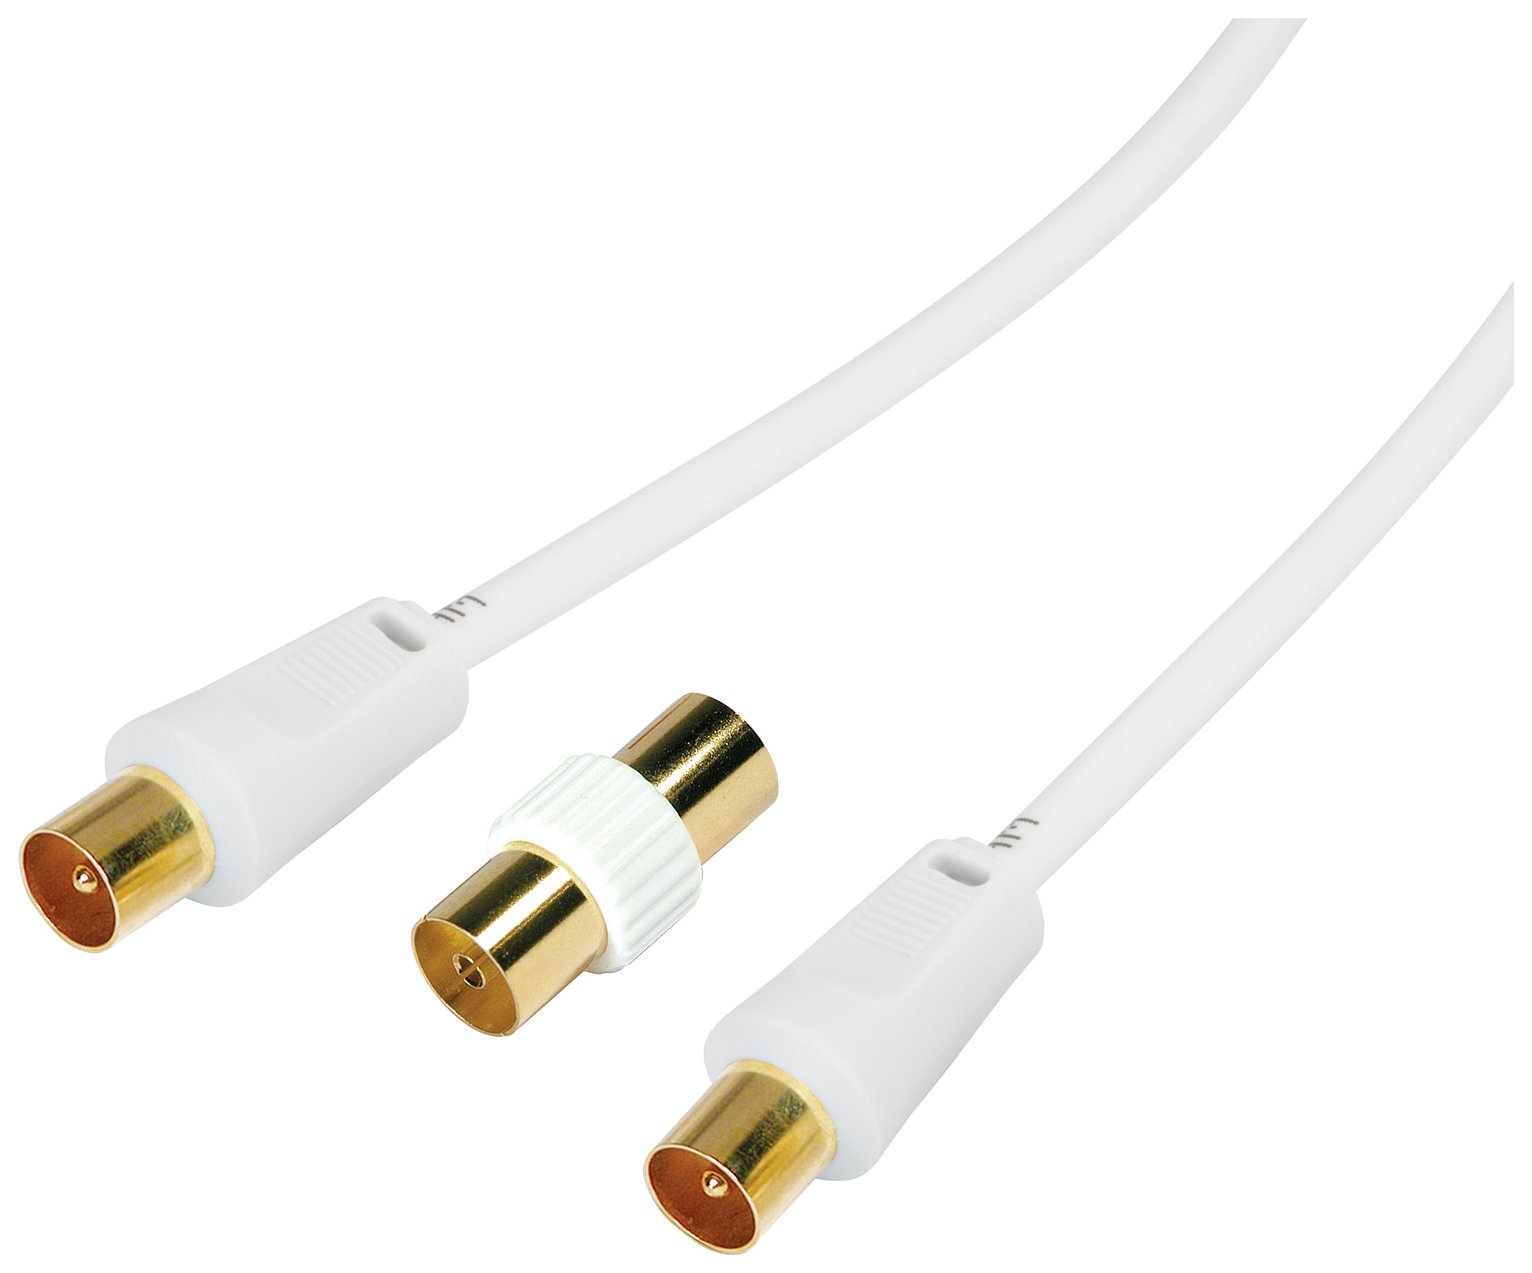 10m Aerial Extension Lead - White